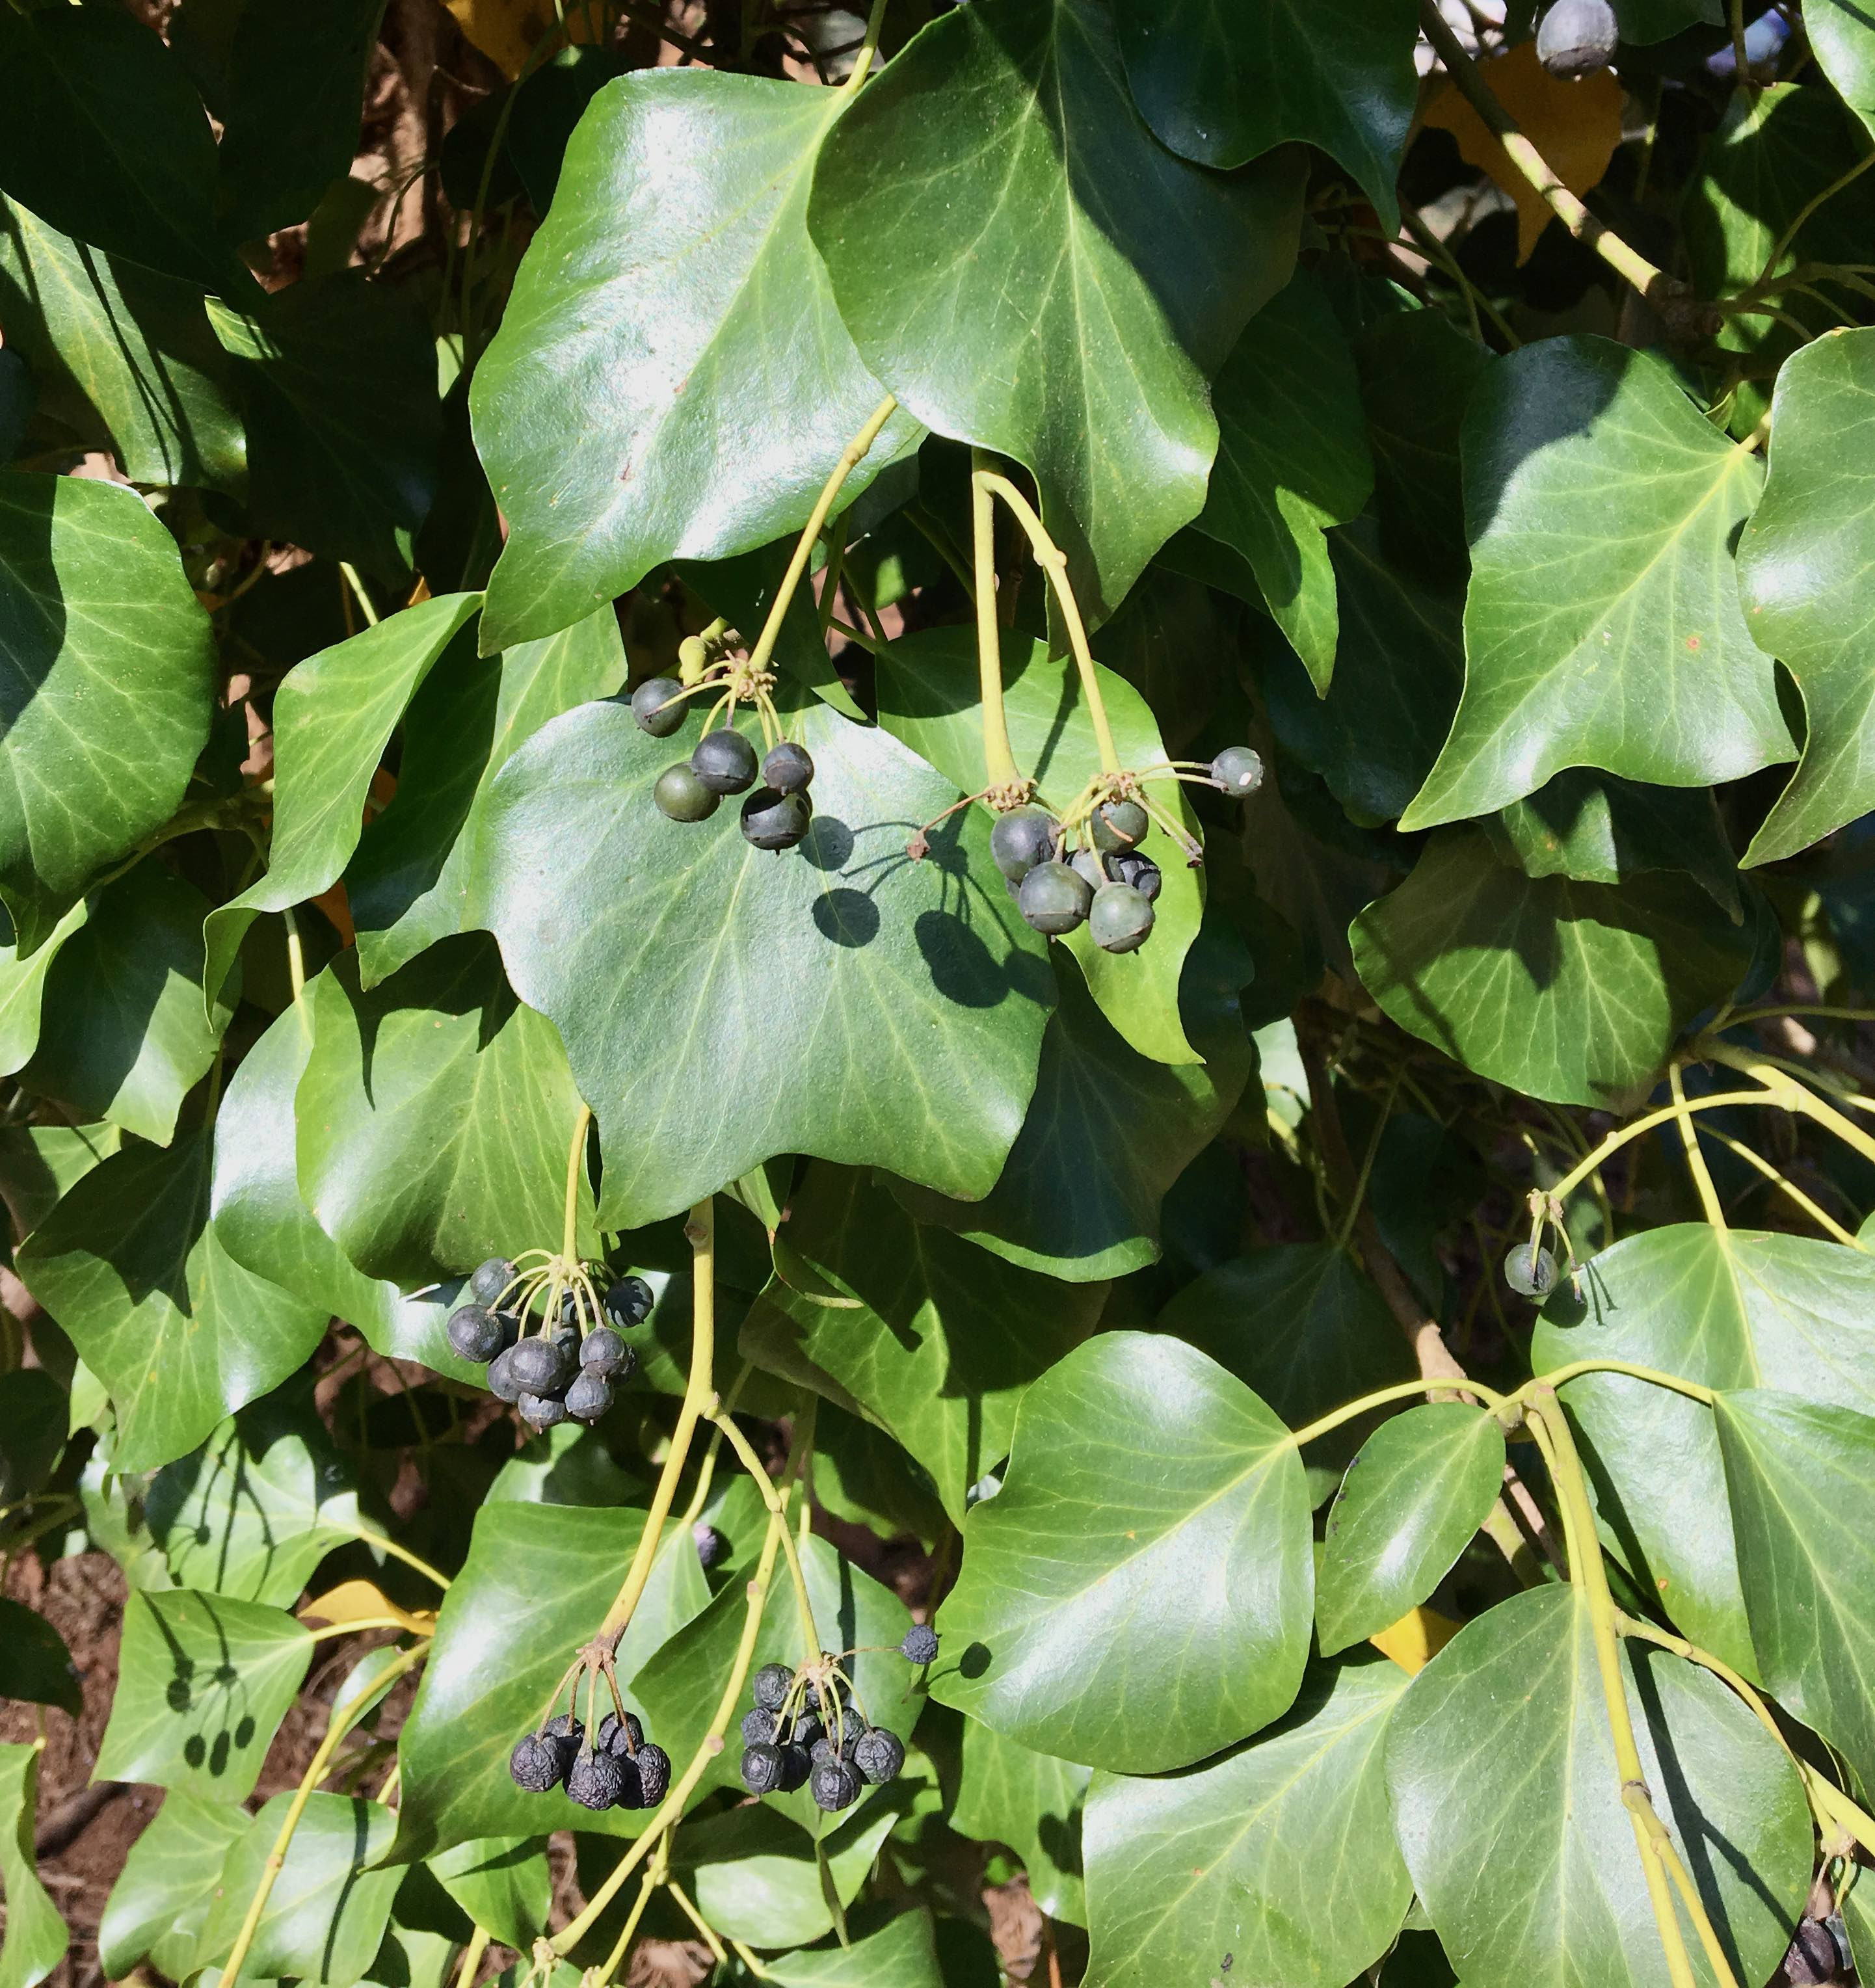 The Scientific Name is Hedera helix var. helix. You will likely hear them called English Ivy, Common Ivy. This picture shows the English Ivy only flowers and form bluish-black fruits once it starts to climb. Mature leaves may be more oval and less lobed than immature leaves. of Hedera helix var. helix